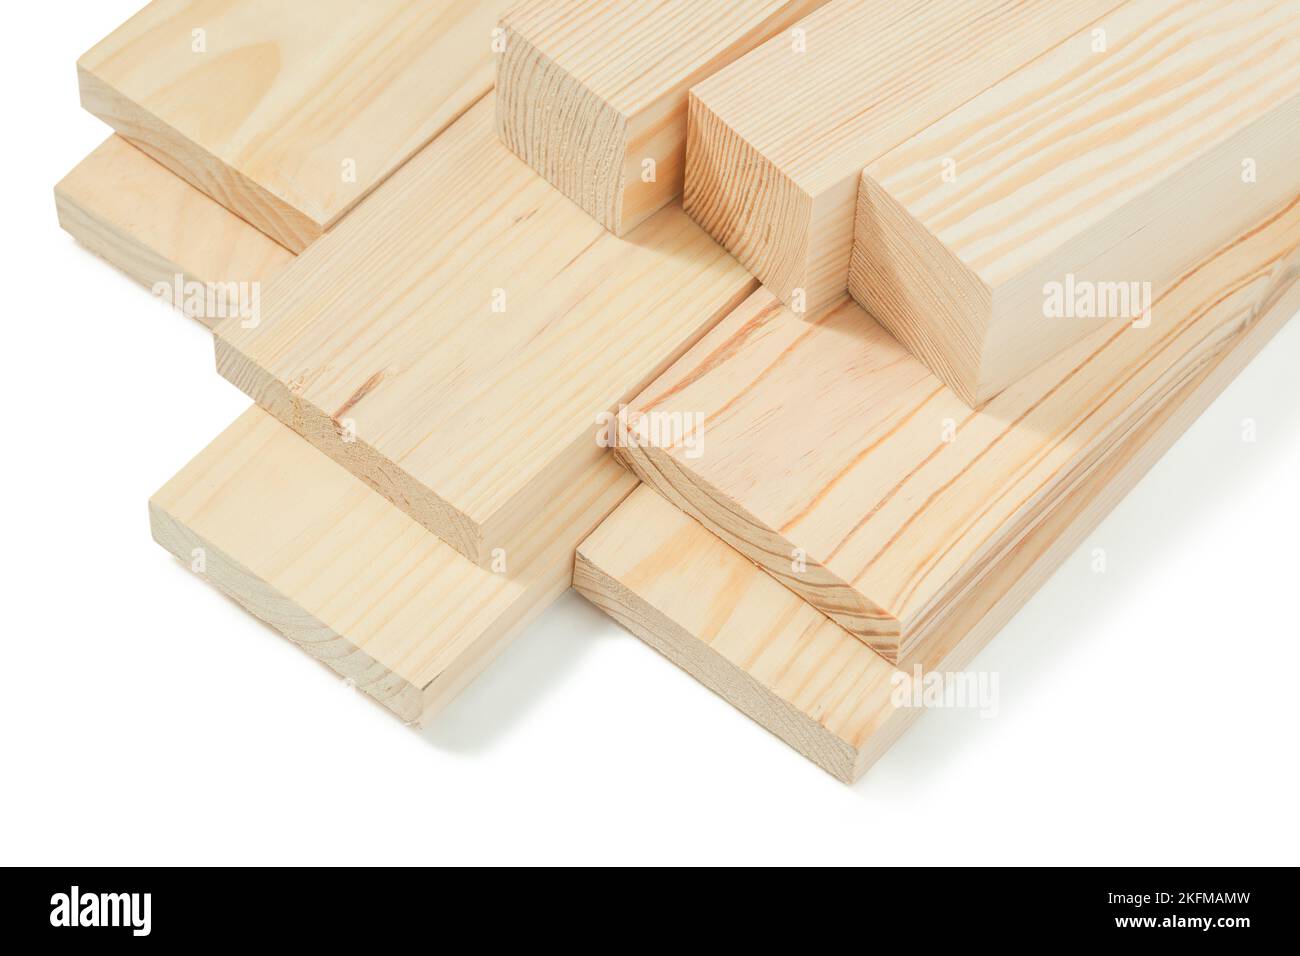 pine wooden timber beams and boards isolated on white Stock Photo